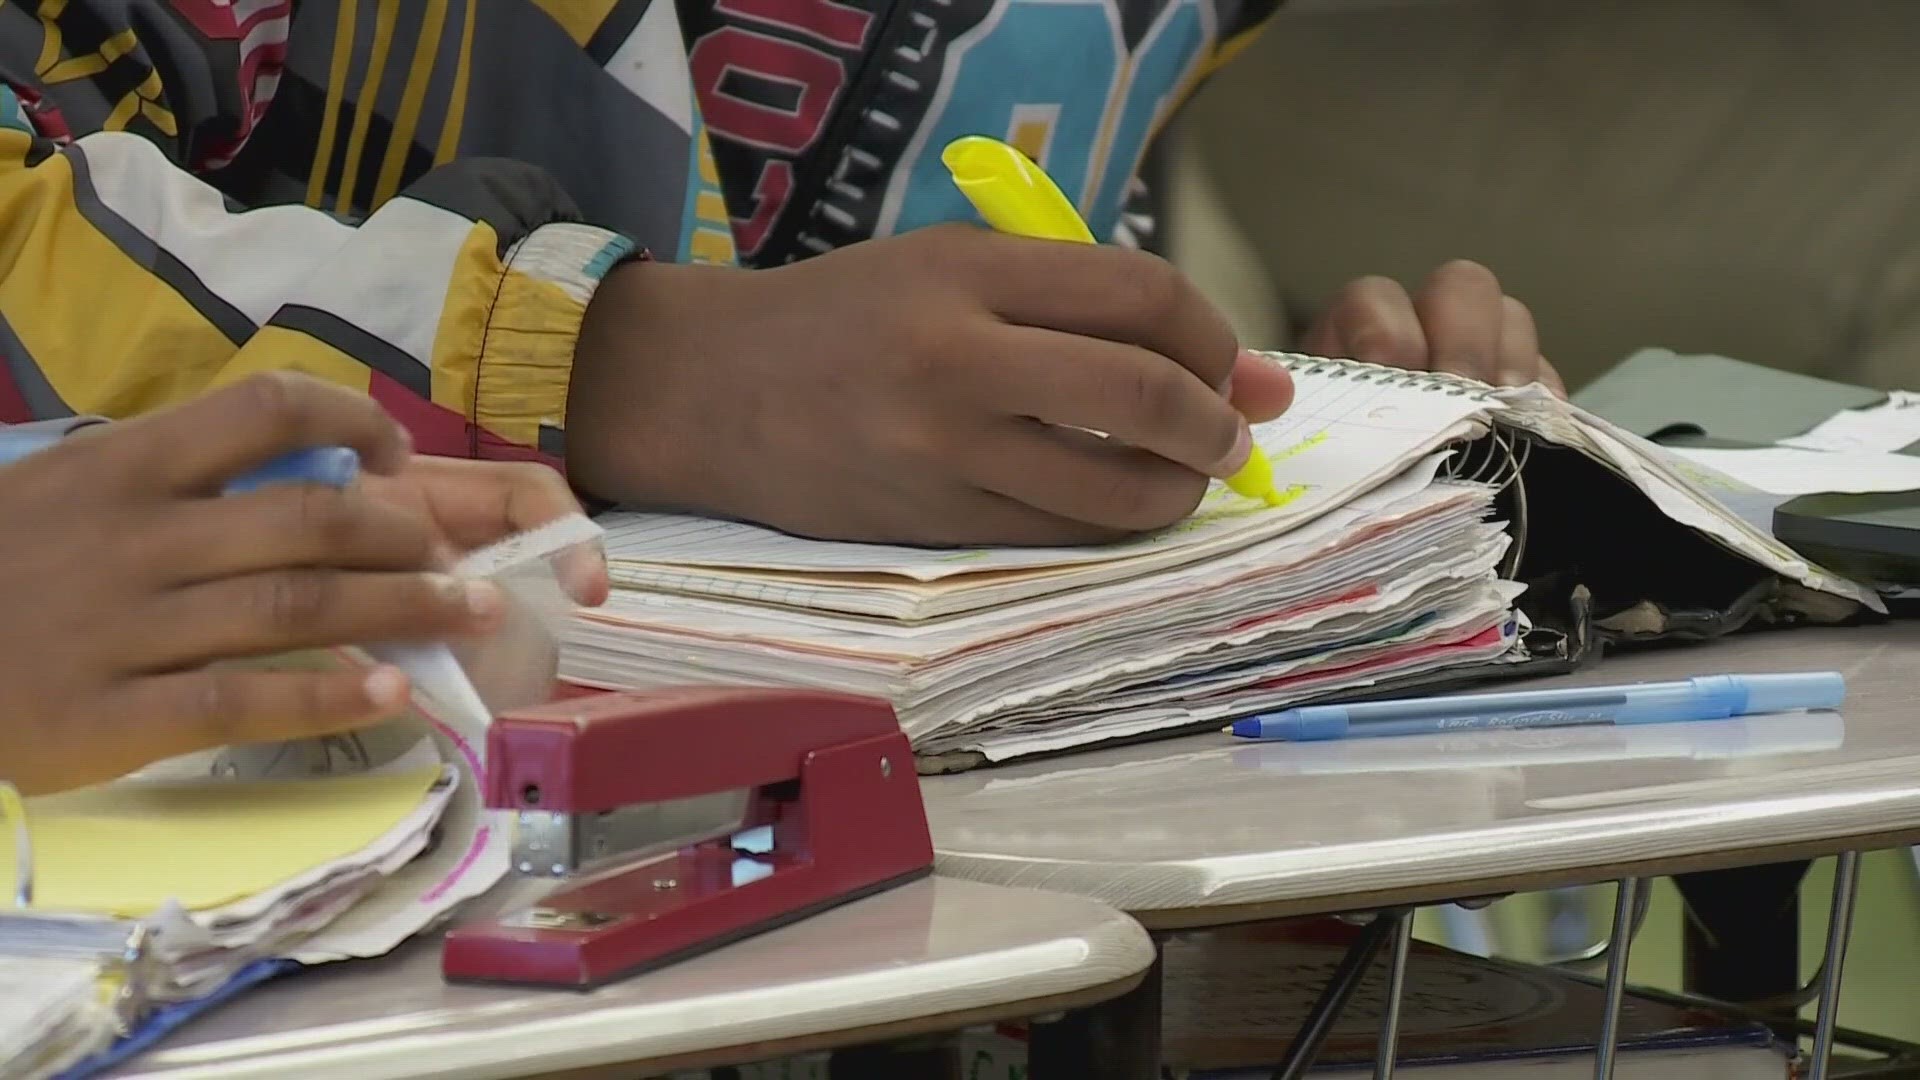 Last year, lawmakers voted down bills pushing for Education Savings Accounts. Officials say it has a better chance of passing this year with Gov. Landry's support.